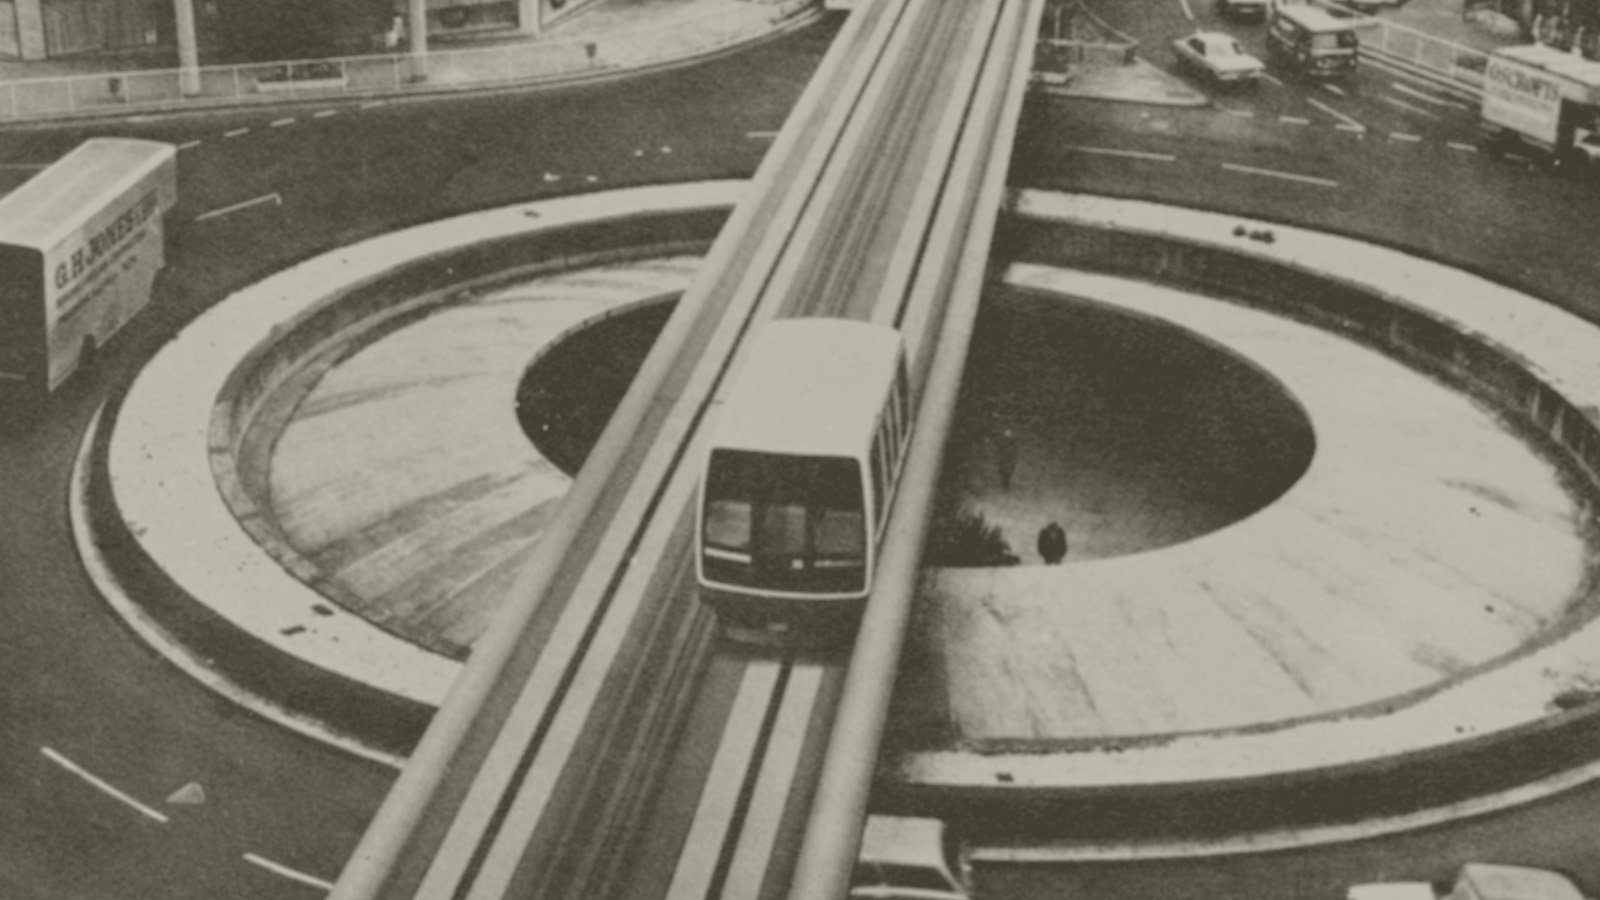 The Sheffield Monorail going over the Hole in the Road